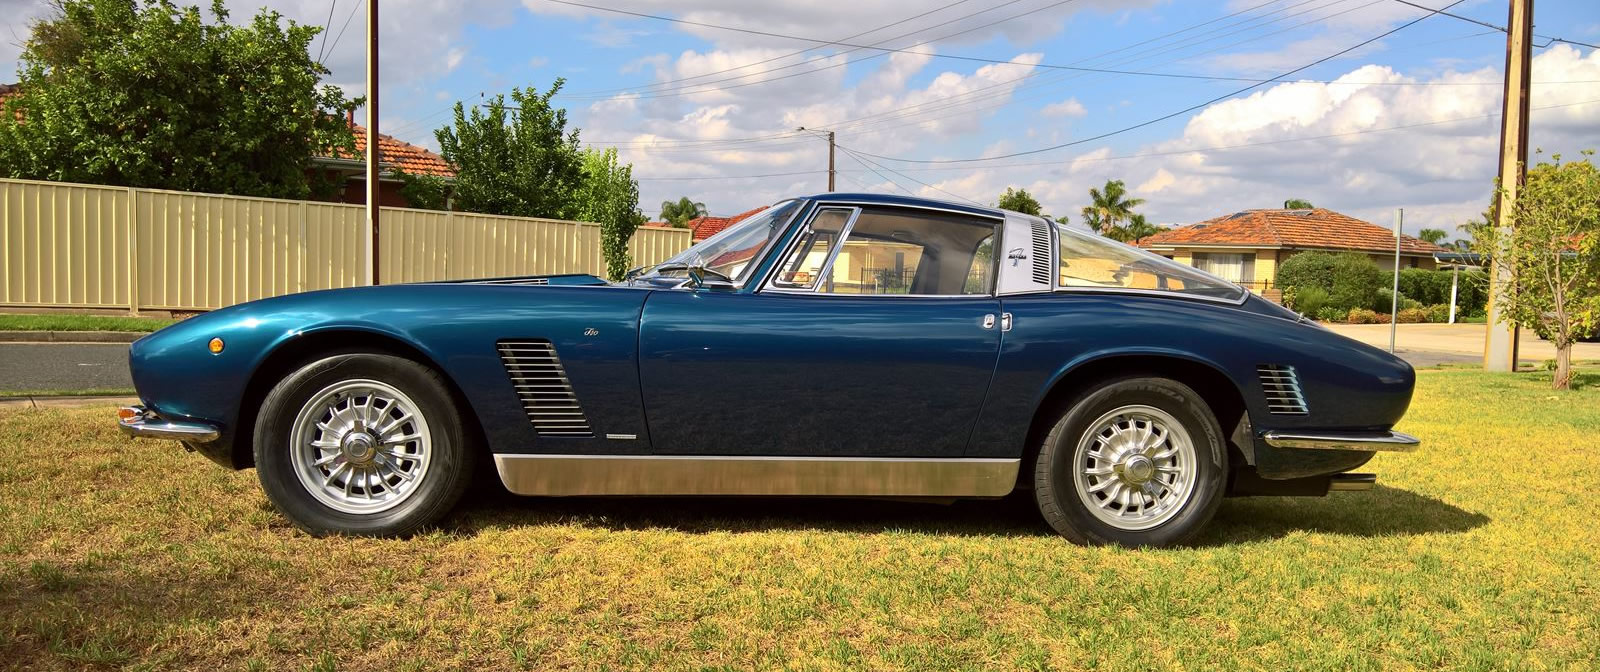 1970 Iso Grifo: Italian Supercar with American Muscle